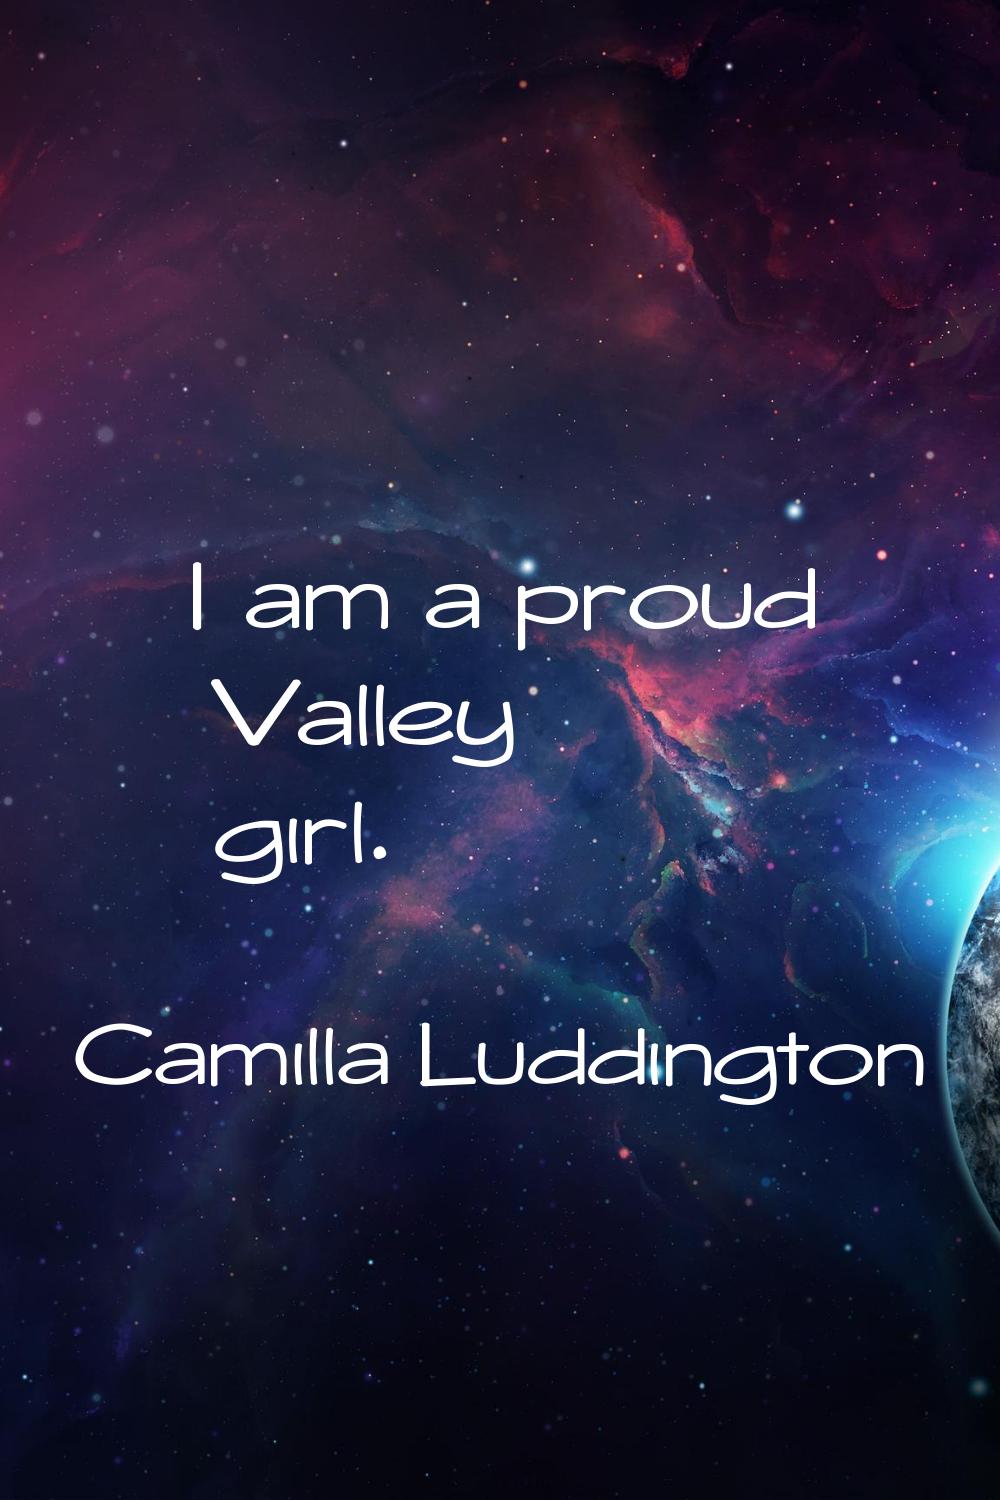 I am a proud Valley girl.